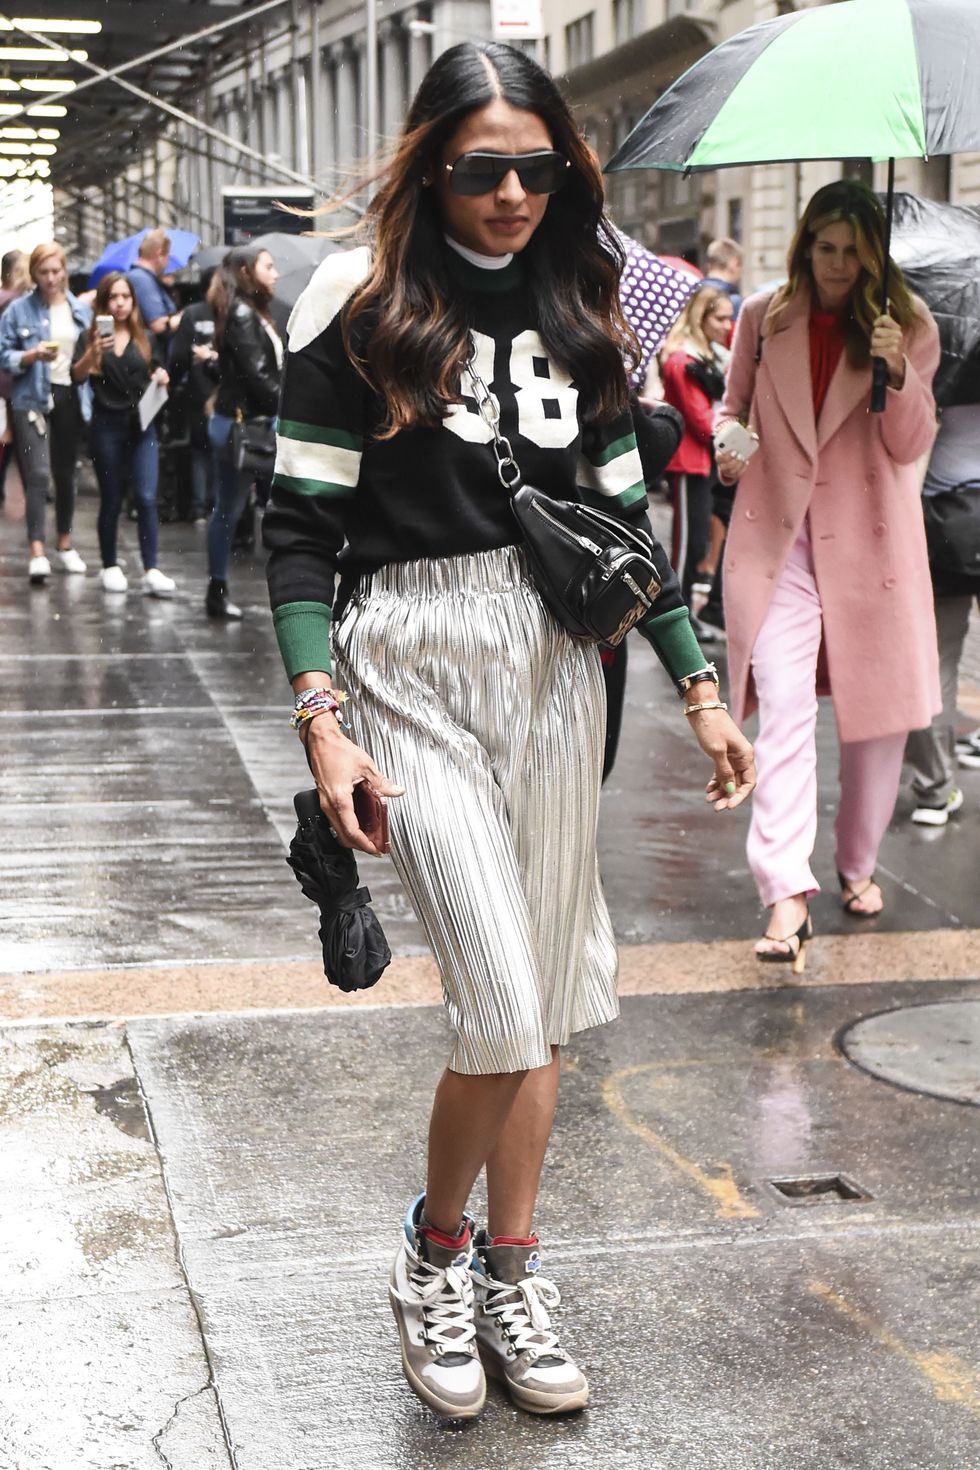 How to Make a Sports Jersey Look Stylish (Seriously)